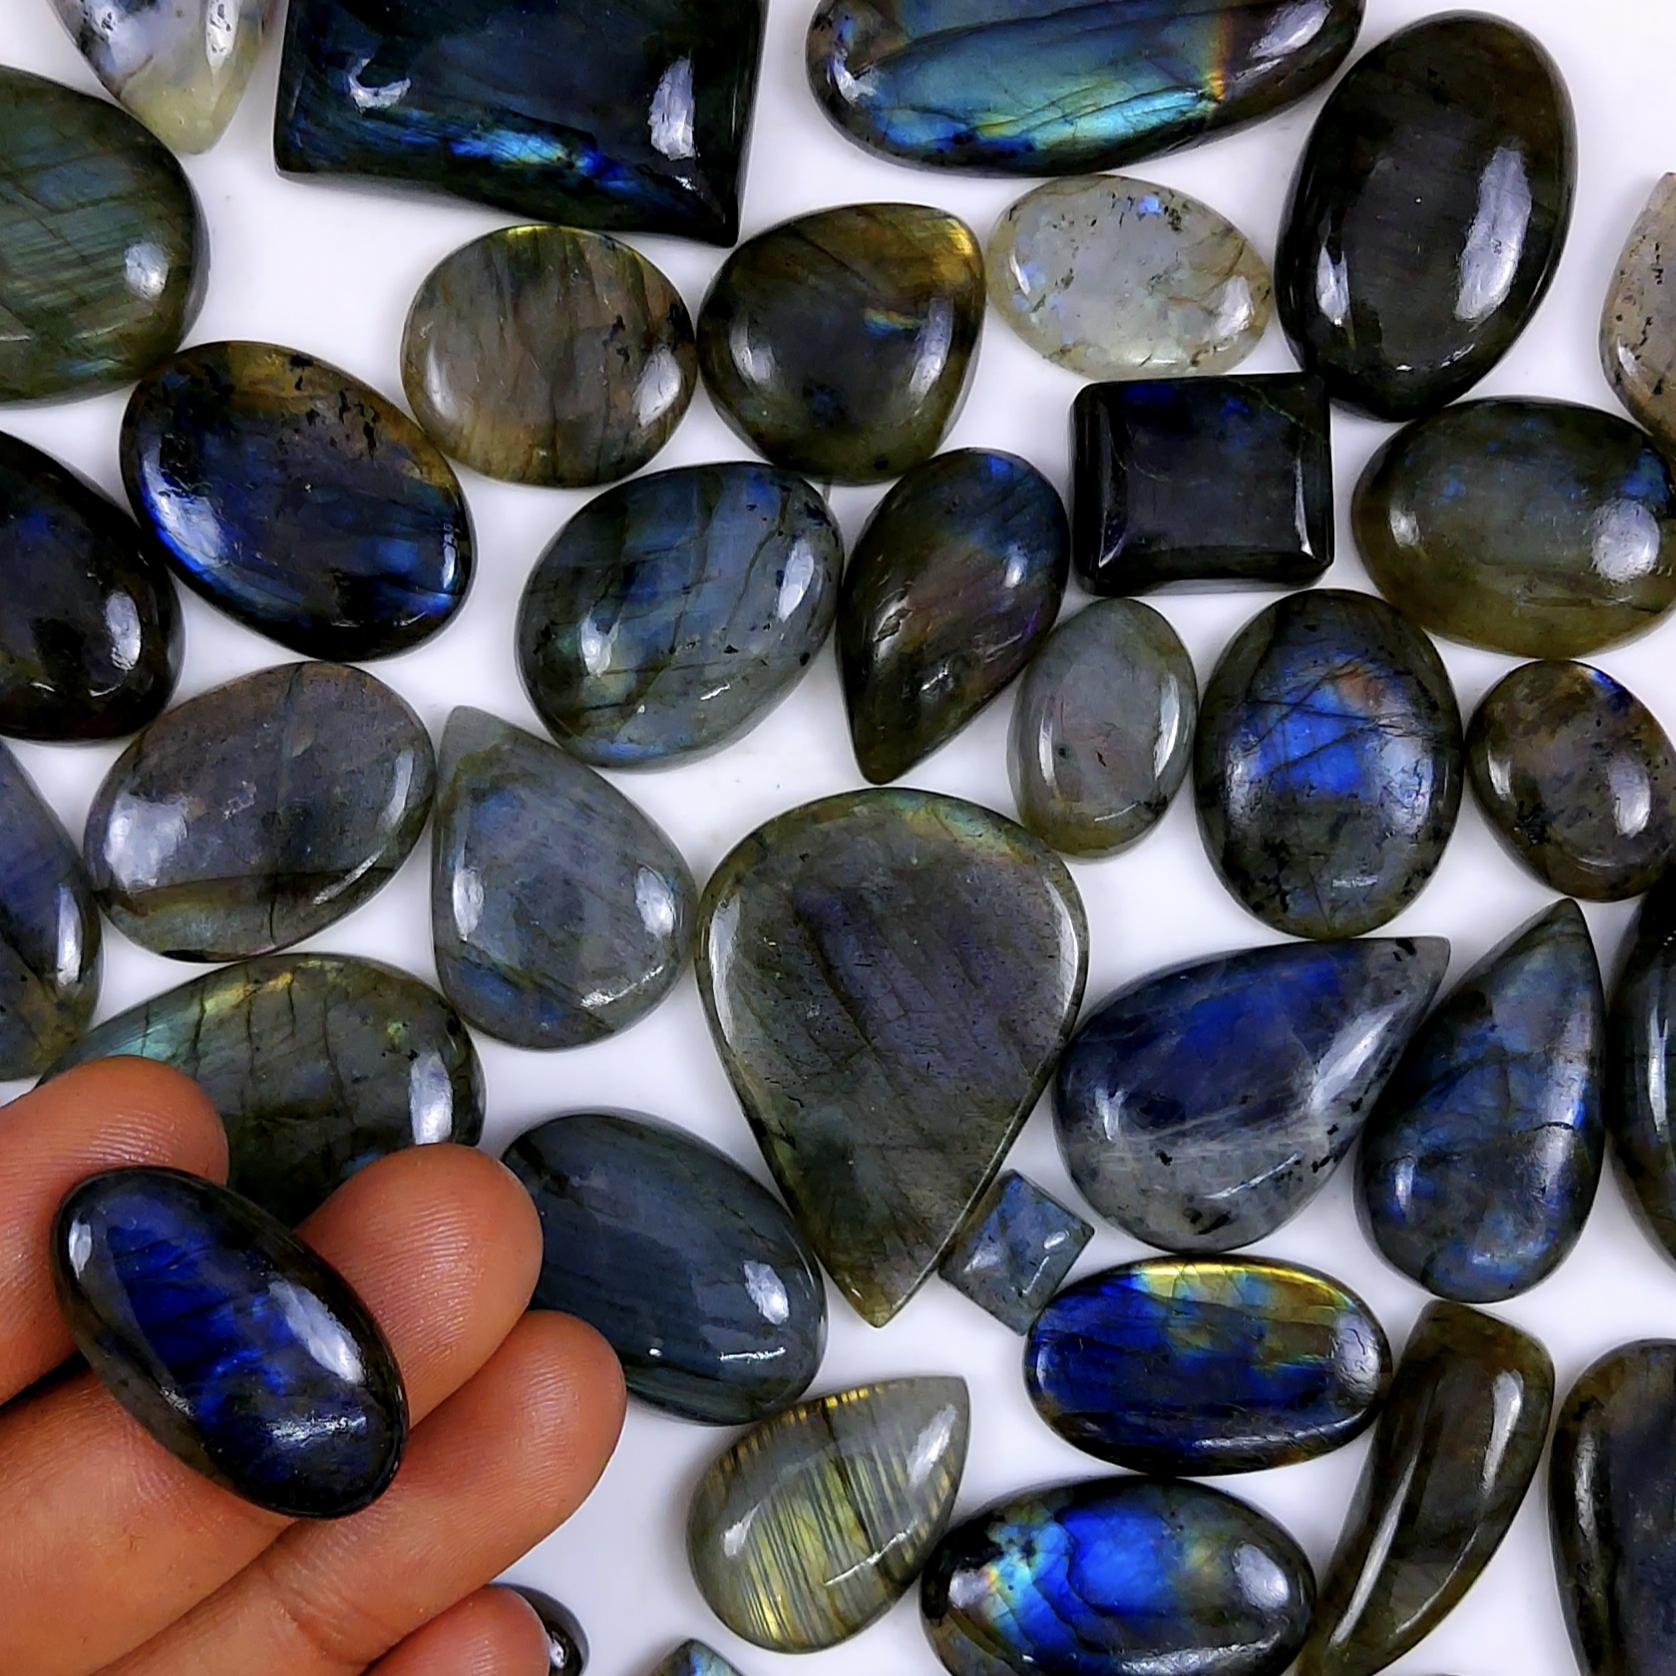 52pc 1665Cts Labradorite Cabochon Multifire Healing Crystal For Jewelry Supplies, Labradorite Necklace Handmade Wire Wrapped Gemstone Pendant 40x25 20x15mm#6369